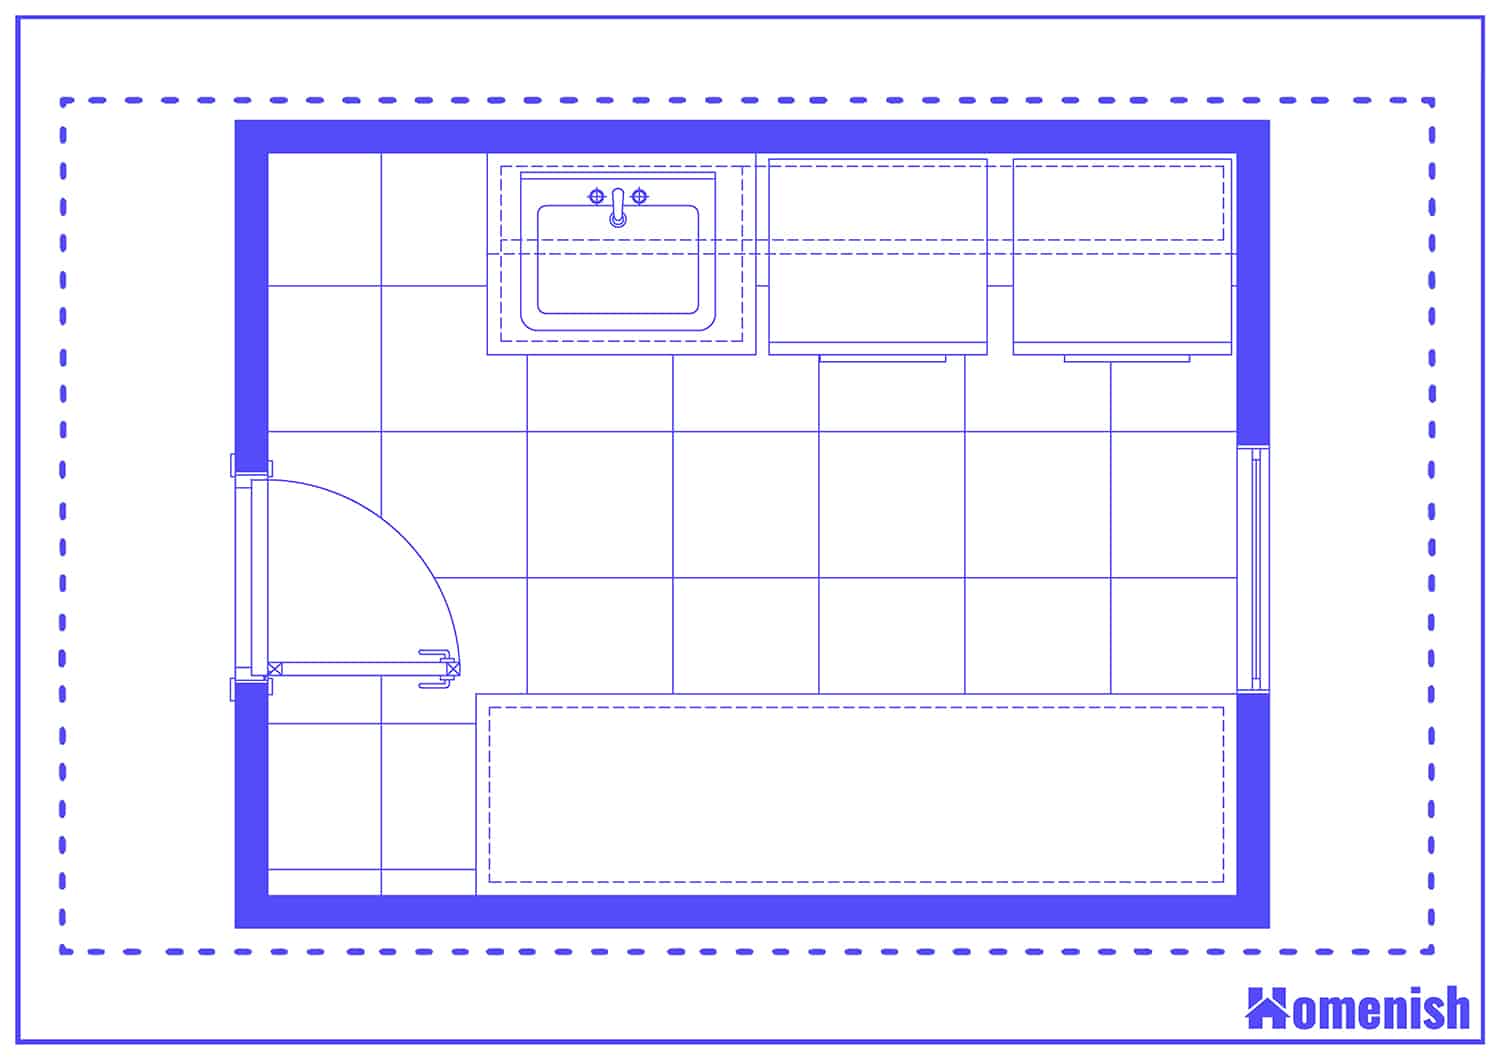 Square Laundry Room with Double Rows Layout